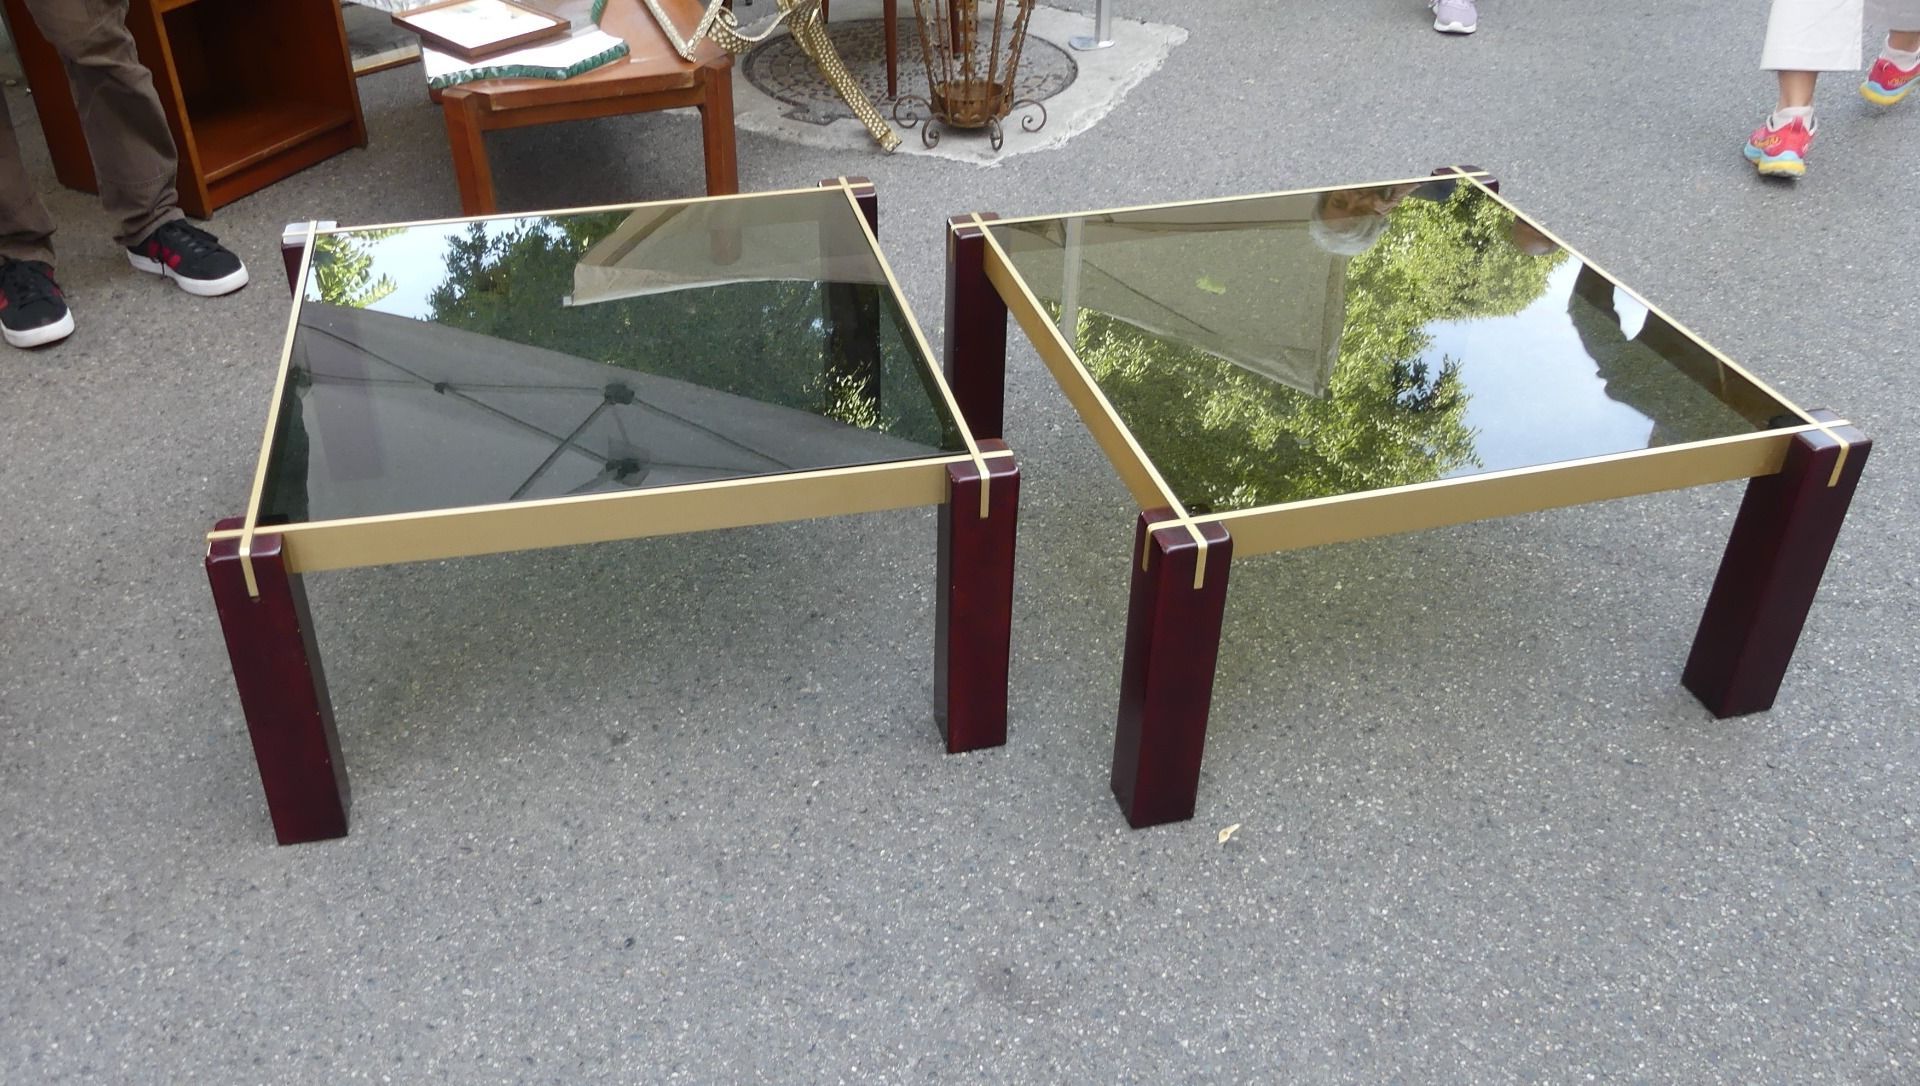 Pair Of Vintage Coffee Tables With Smoked Glass Top Regarding Well Known Glass Topped Coffee Tables (View 6 of 20)